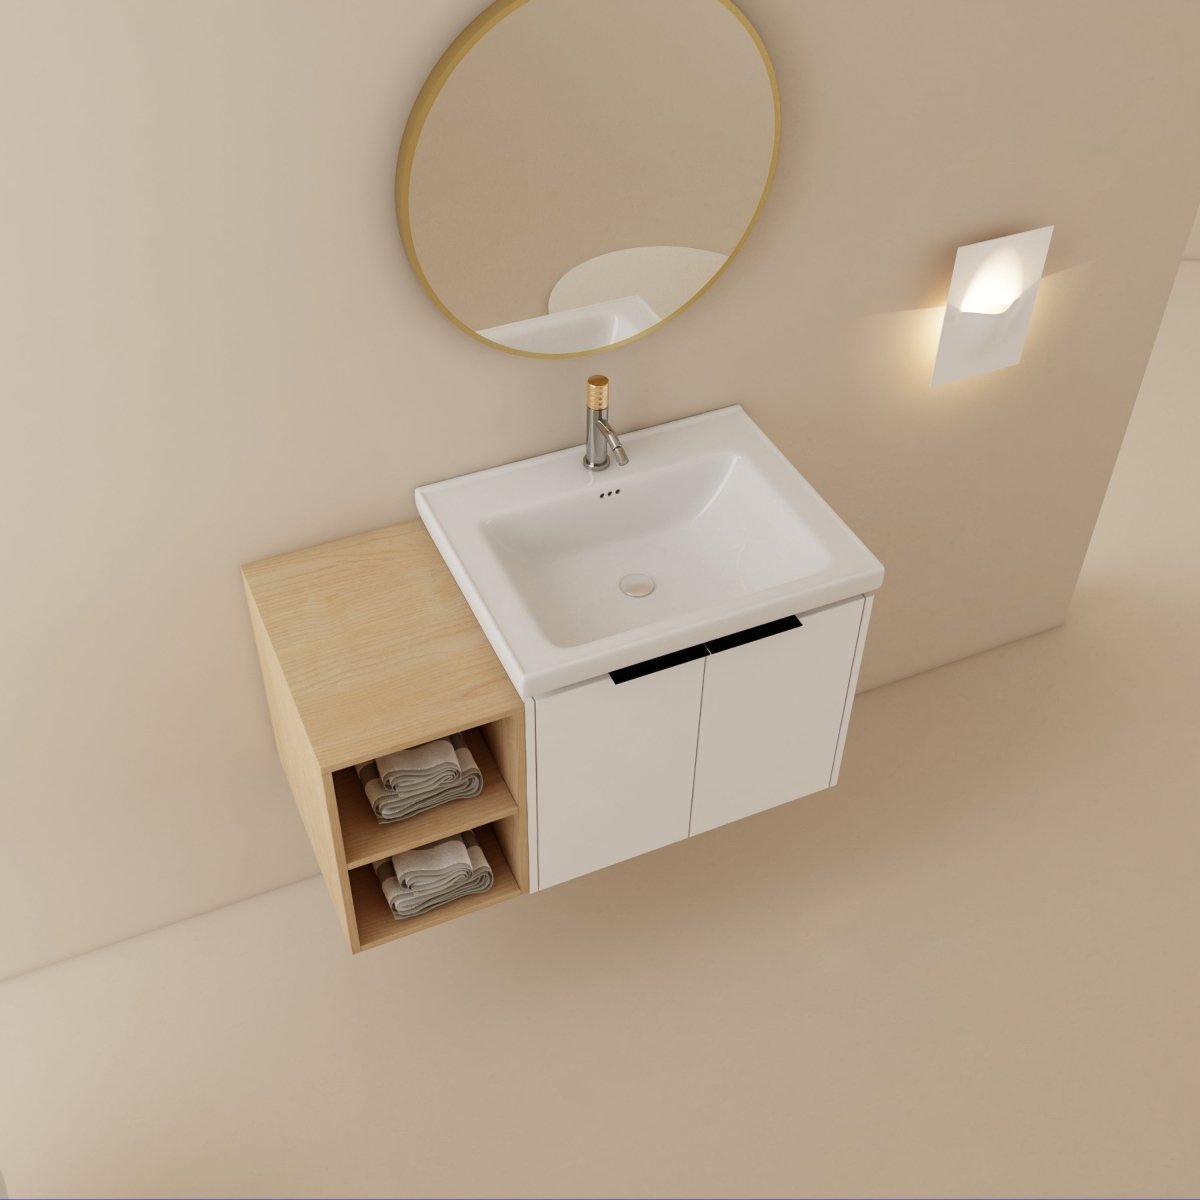 Exbrite 36 Inch Soft Close Doors Bathroom Vanity With Sink, and A Small Storage Shelves